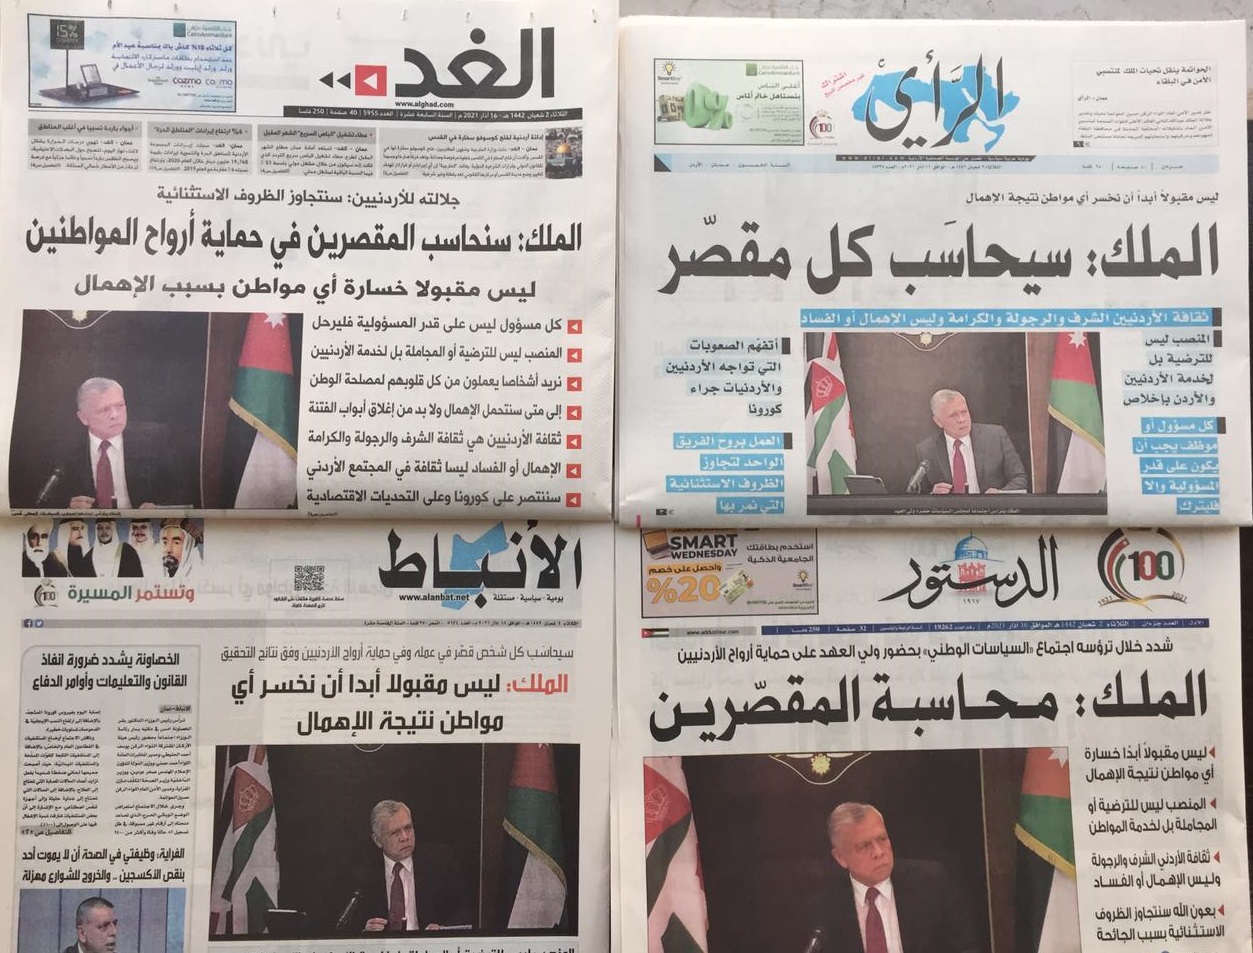 Local Jordanian newspapers all display similar headlines of the king promising justice for the deaths in al-Salt. (Jassar al-Tahat - 19/03/21)